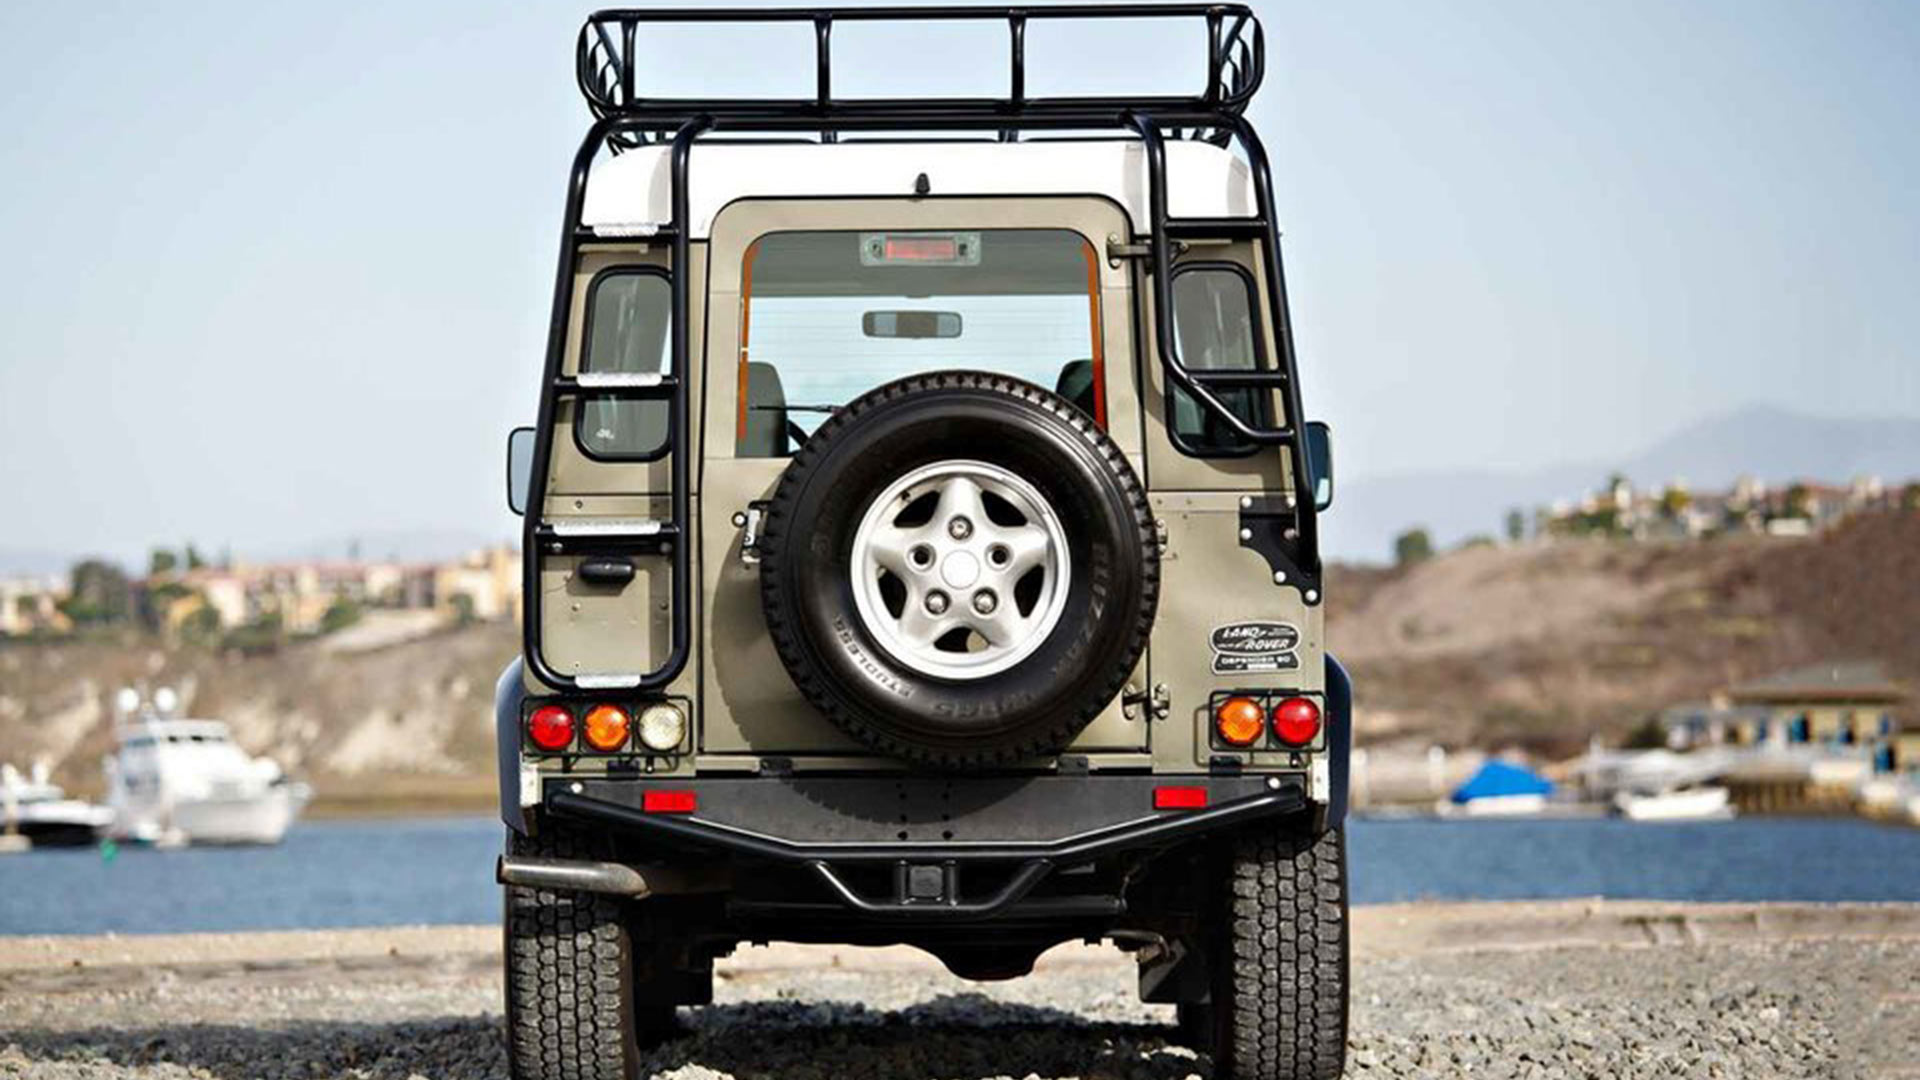 Last NAS Land Rover Defender 90 auction